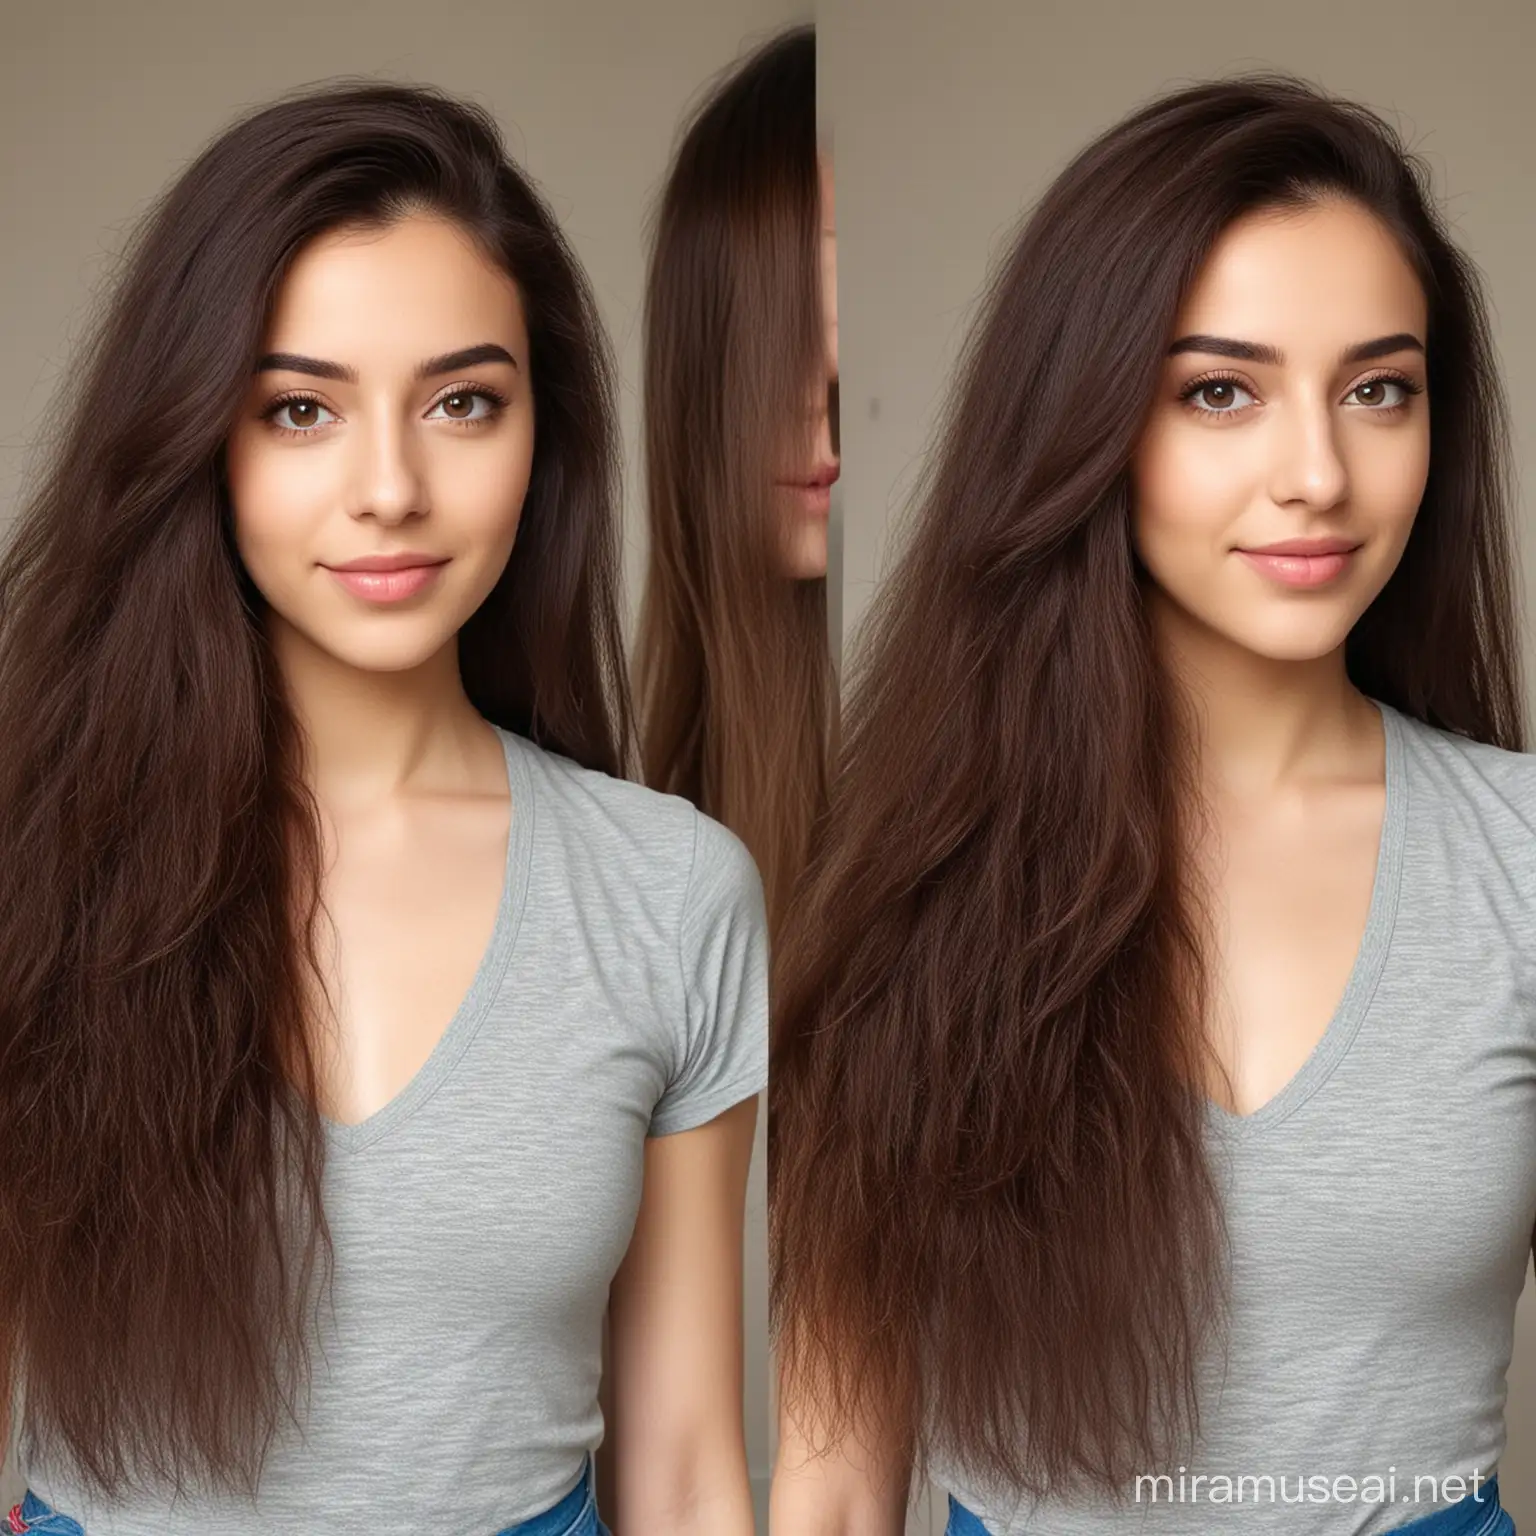 Transformation of Hair Texture Before and After Portrait of an Arabian Girl